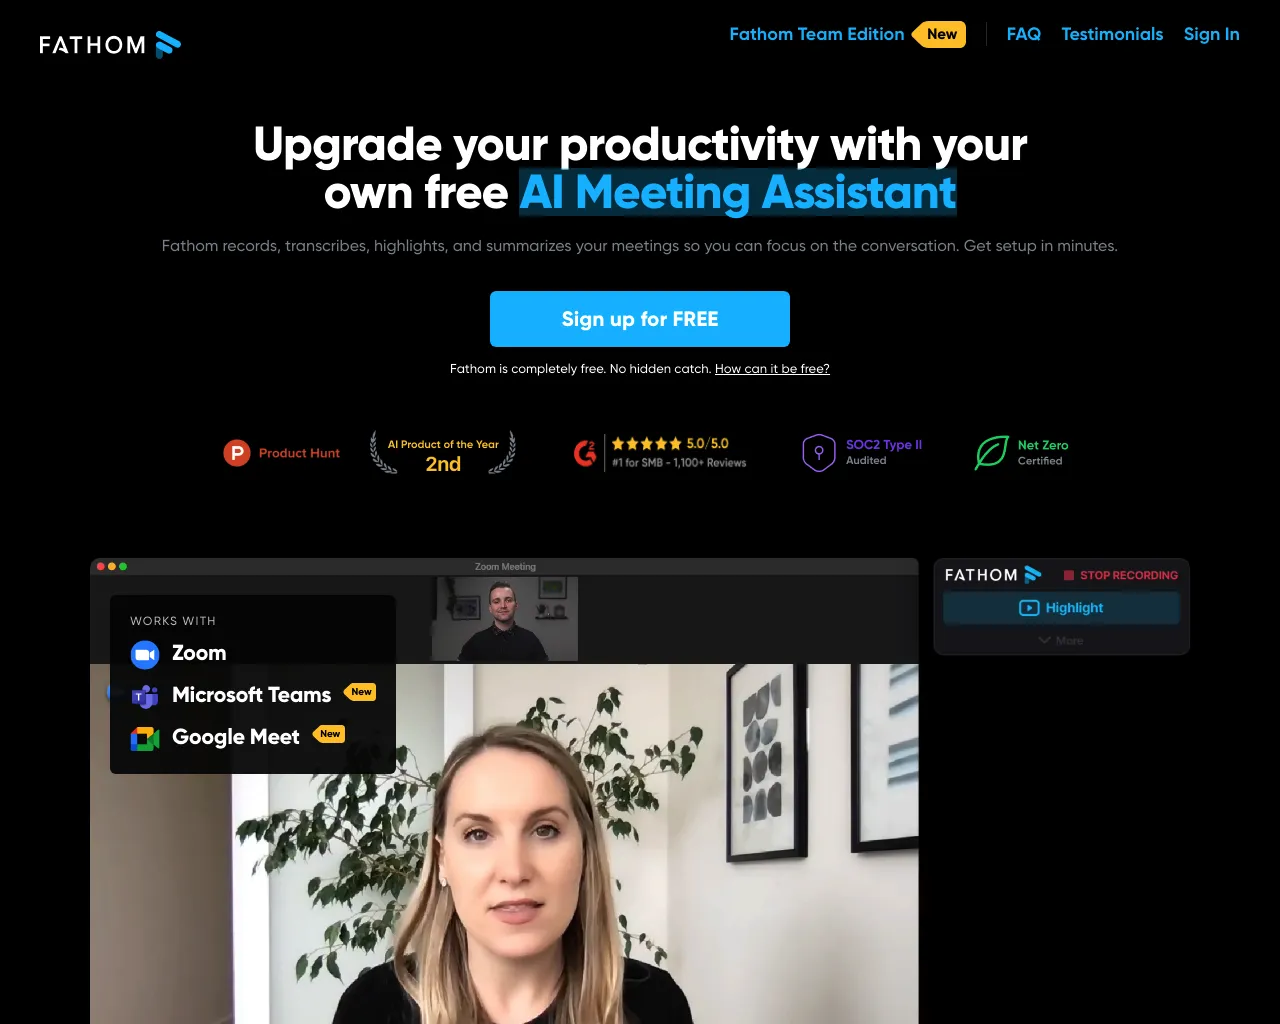 Upgrade your productivity with your own free AI Meeting Assistant